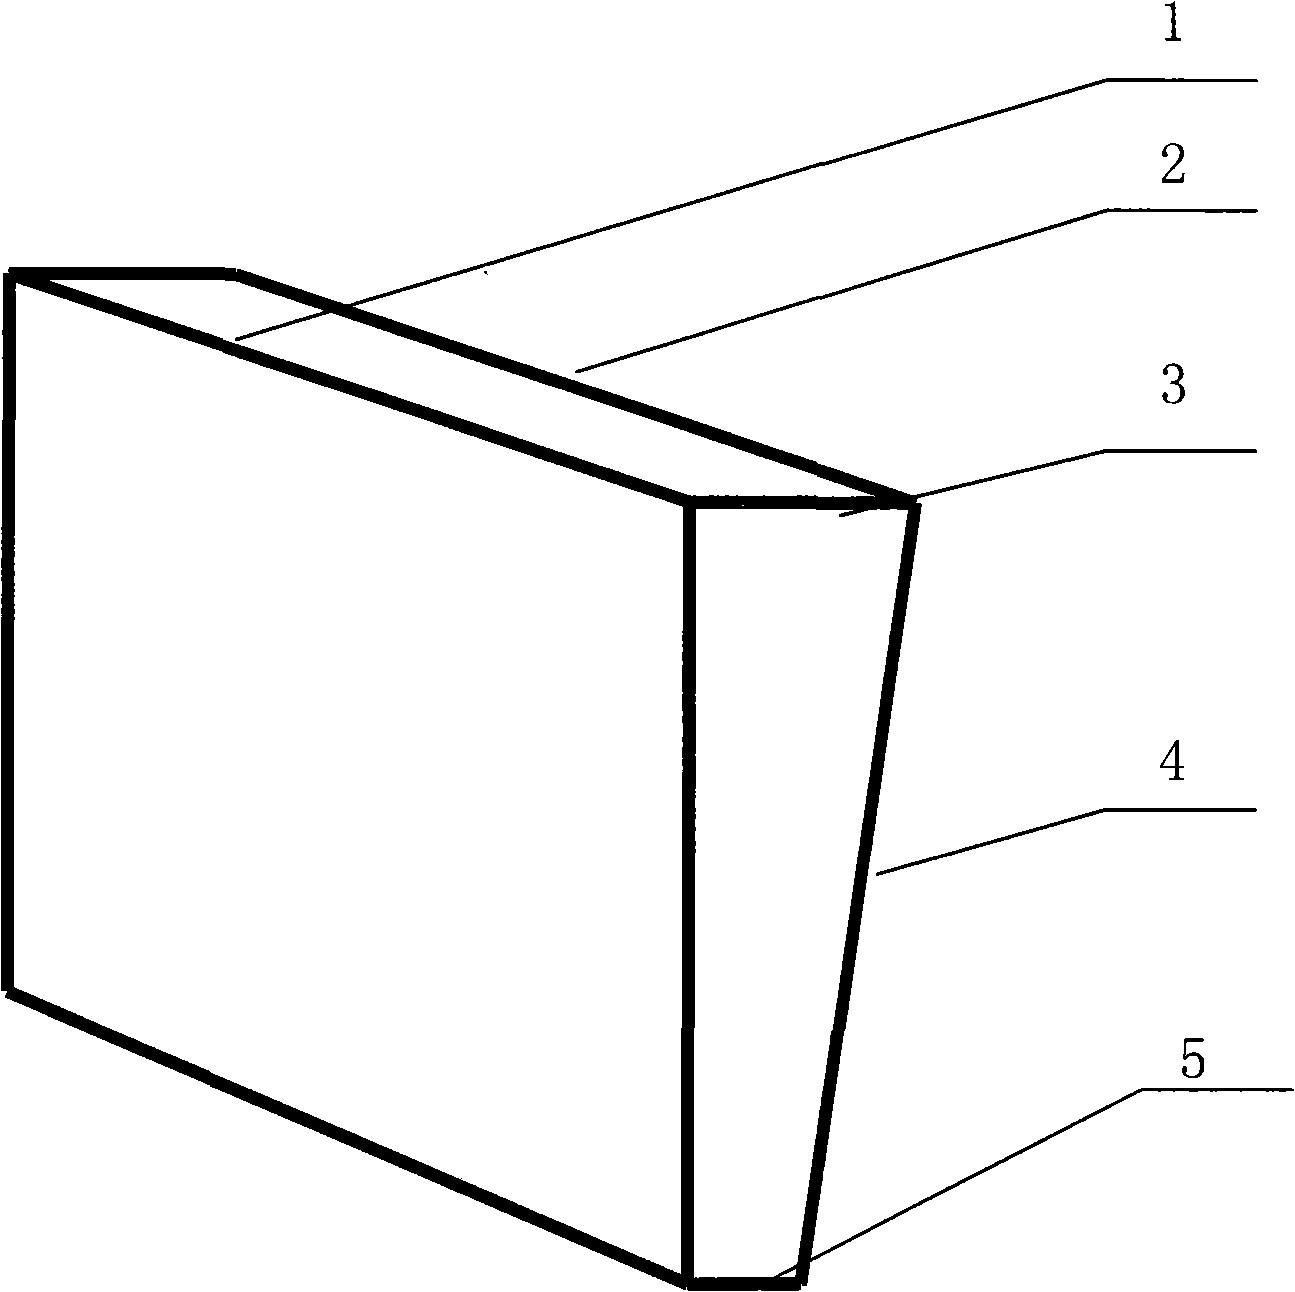 Cross section special-shaped tile